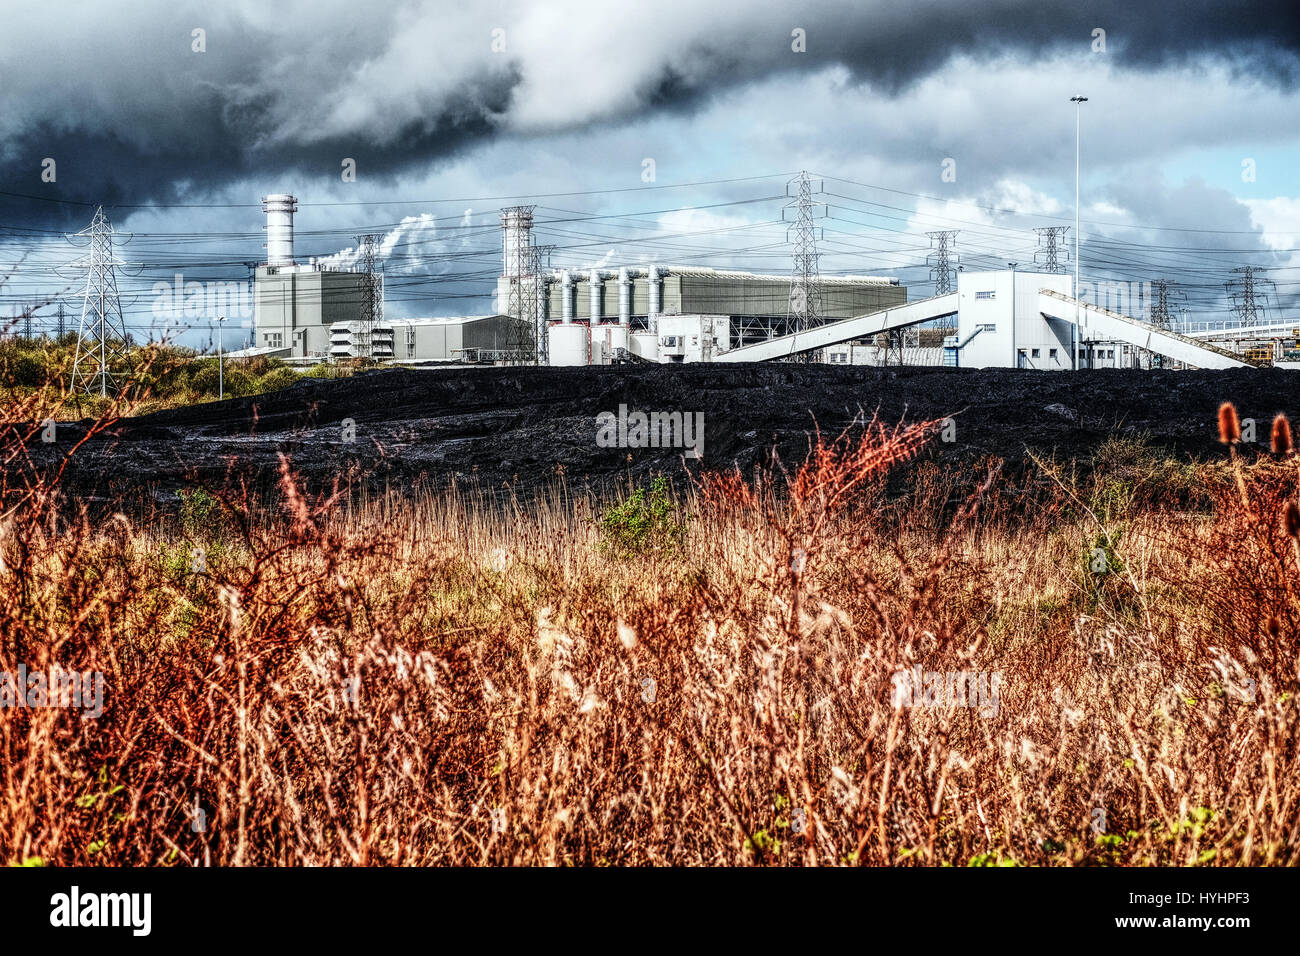 Uskmouth Power Station, seen from Newport Wetlands Stock Photo